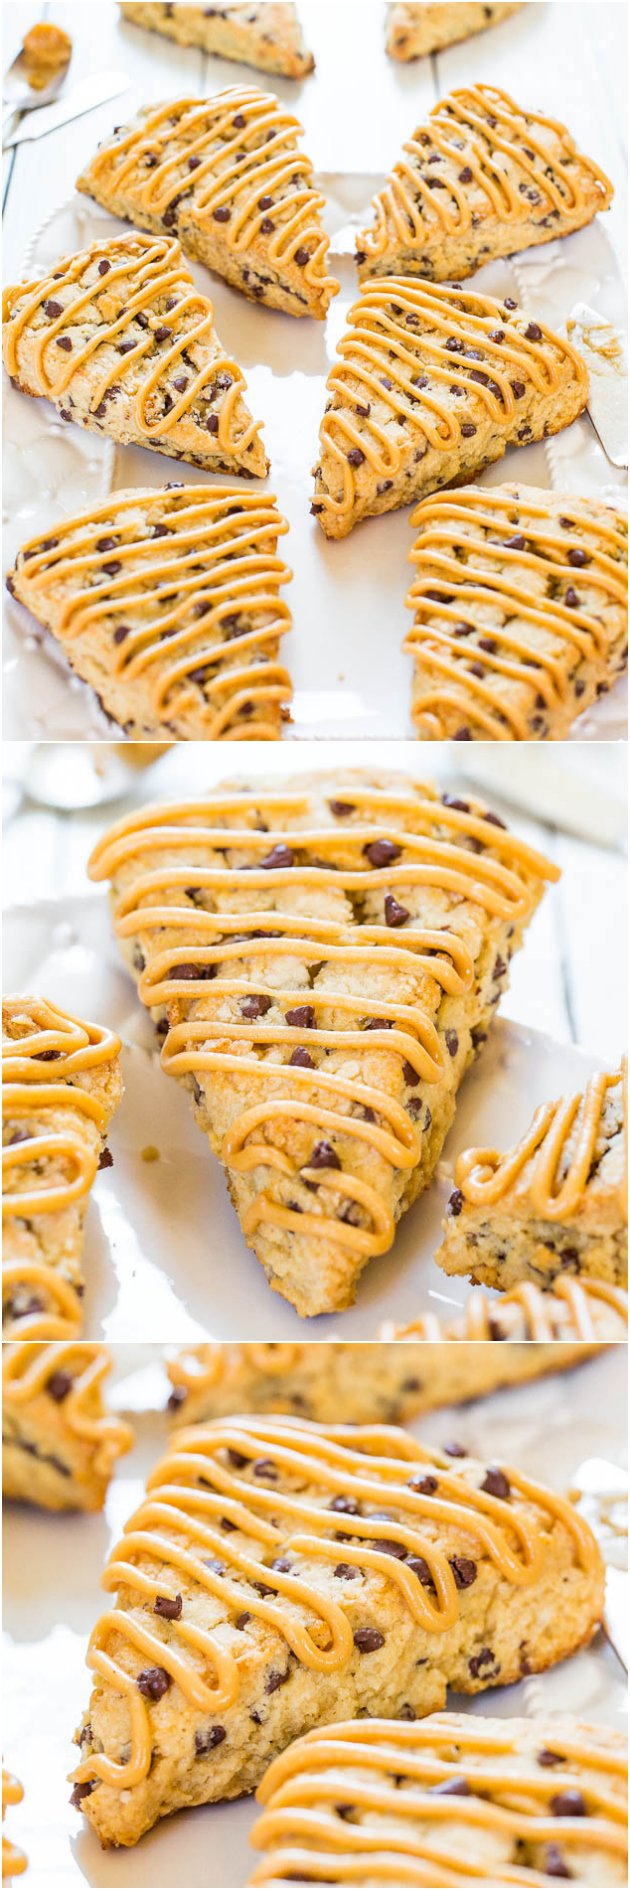 Peanut Butter Chocolate Chip Scones - Easy scones that are moist, full of flavor & loaded with chocolate chips! (and not dry!)